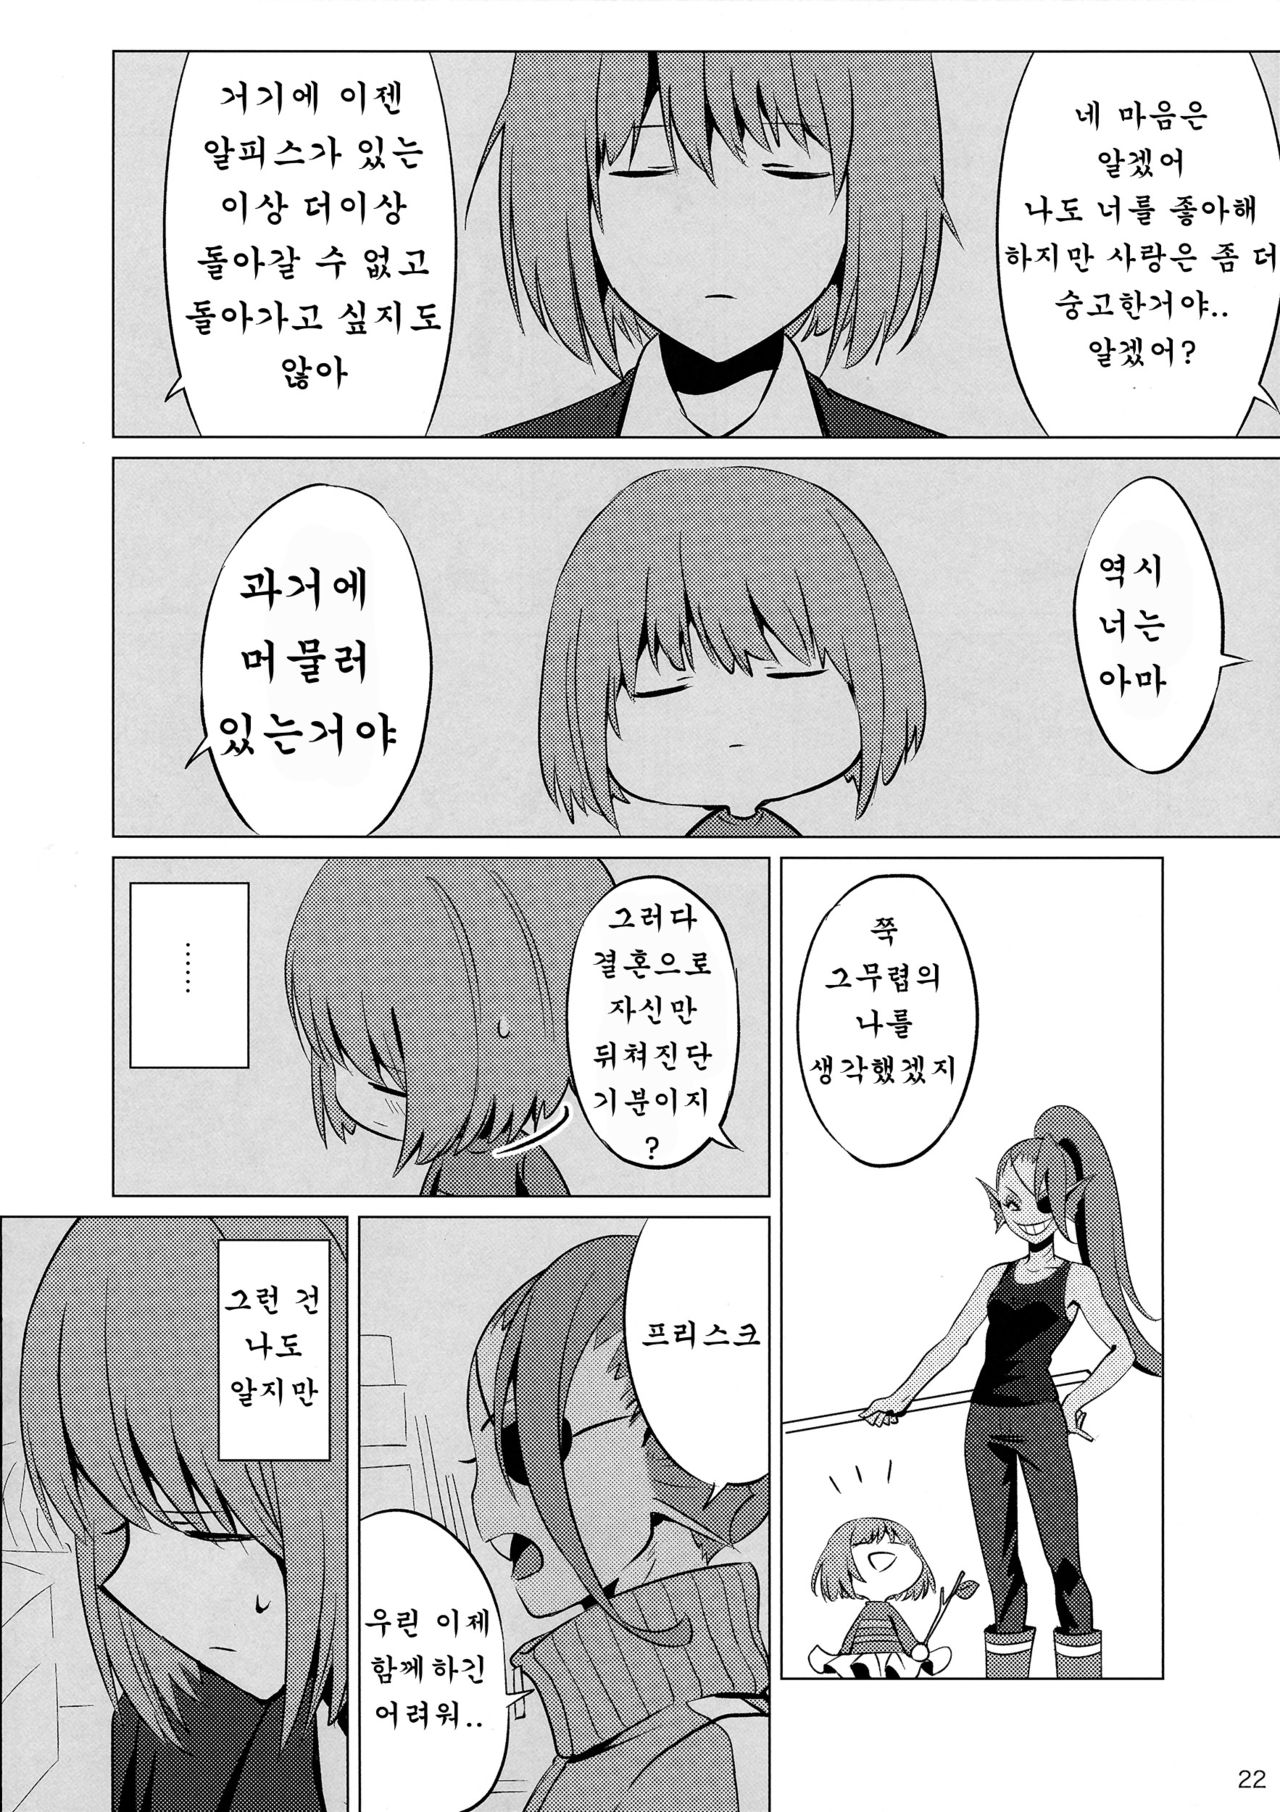 (Minna no Ketsui 2) [Pipiya (Noix)] CLEARLY (Undertale) [Korean] [호접몽] (みんなの決意2) [ぴぴや (のあ)] CLEARLY (Undertale) [韓国翻訳]